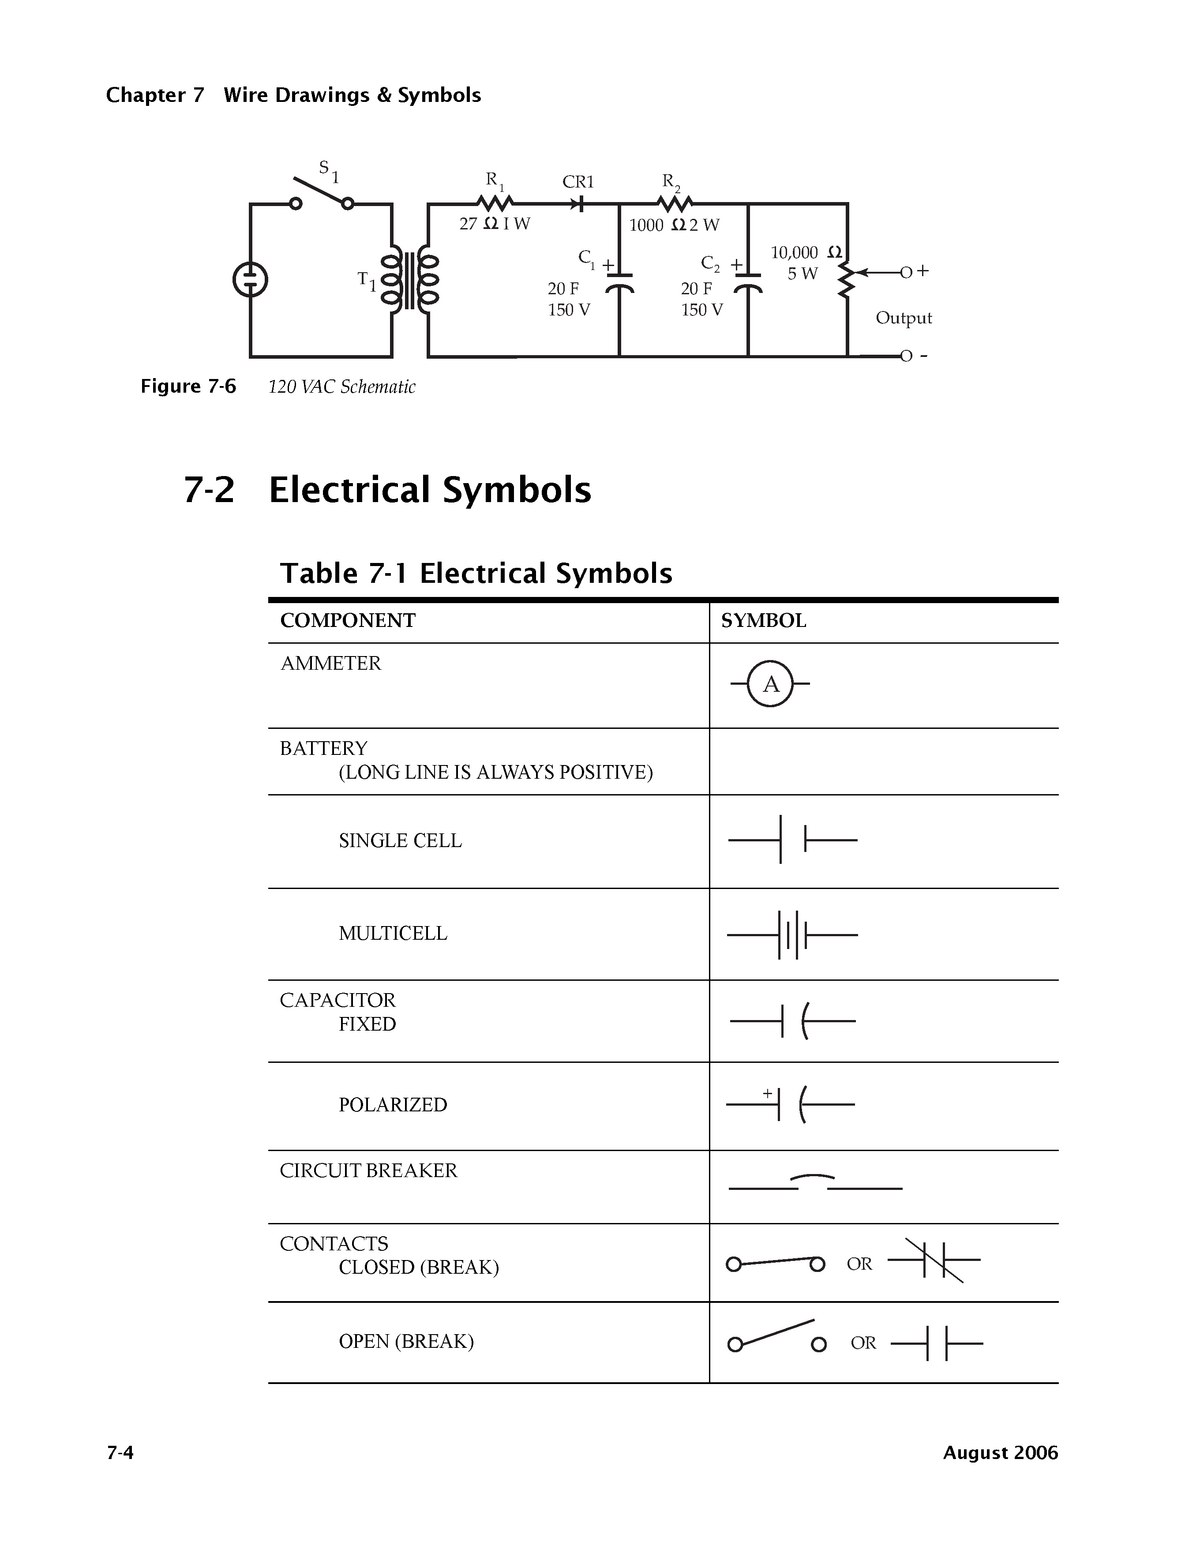 Electrical Symbols - Chapter 7 Wire Drawings & Symbols 7-4 August 2006 ...